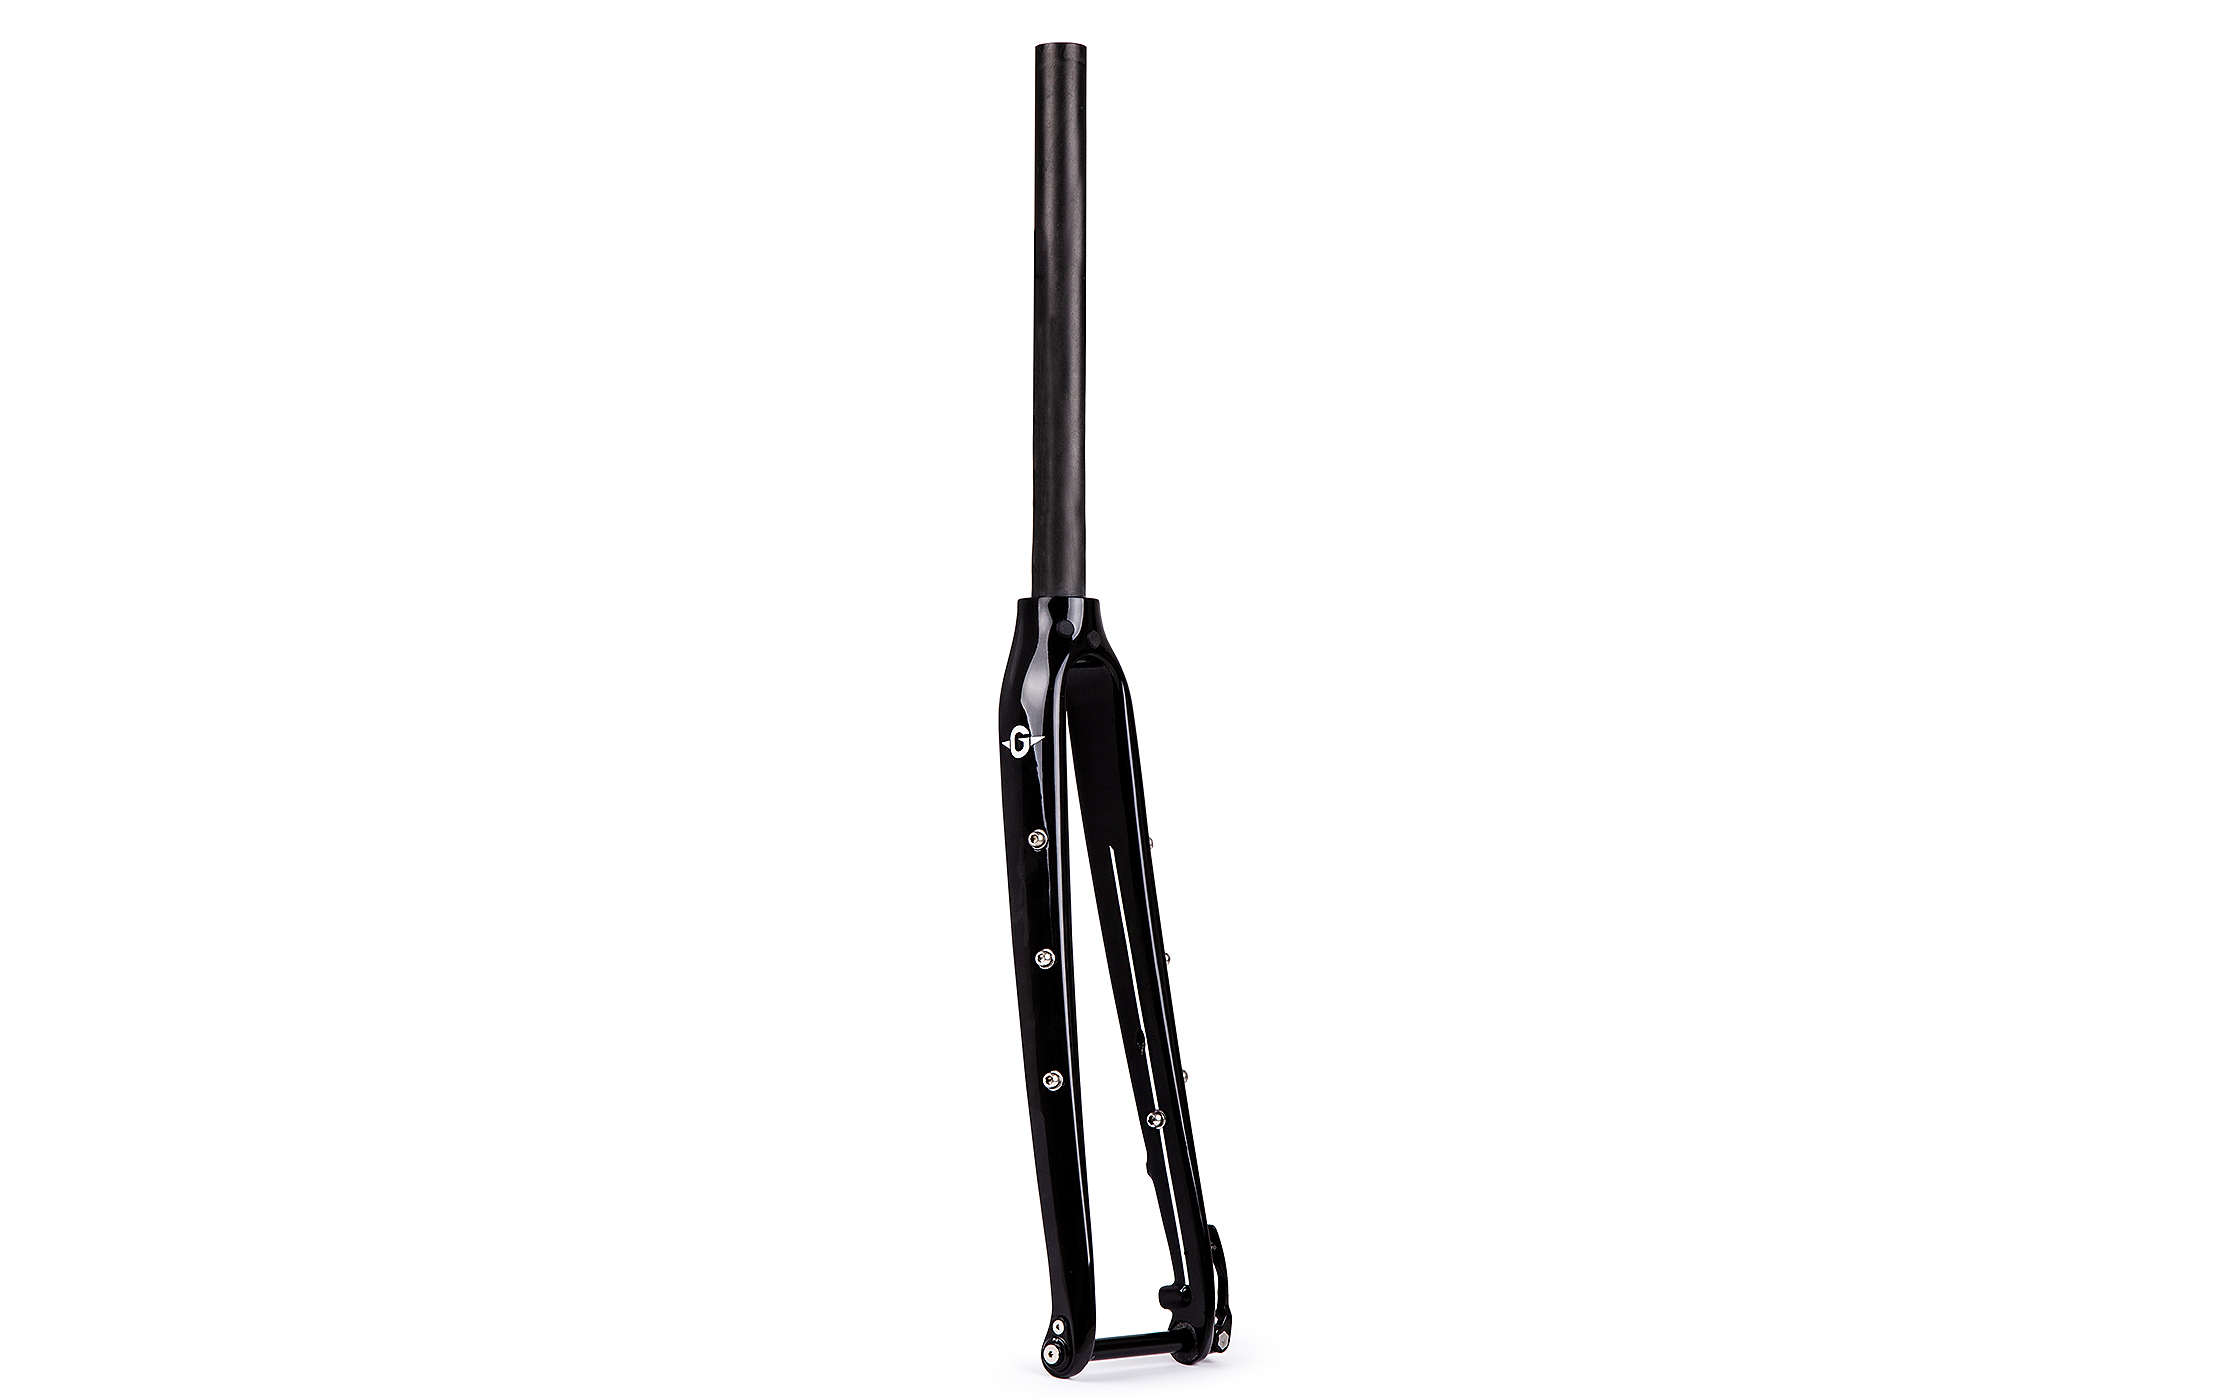 carbon touring fork disc